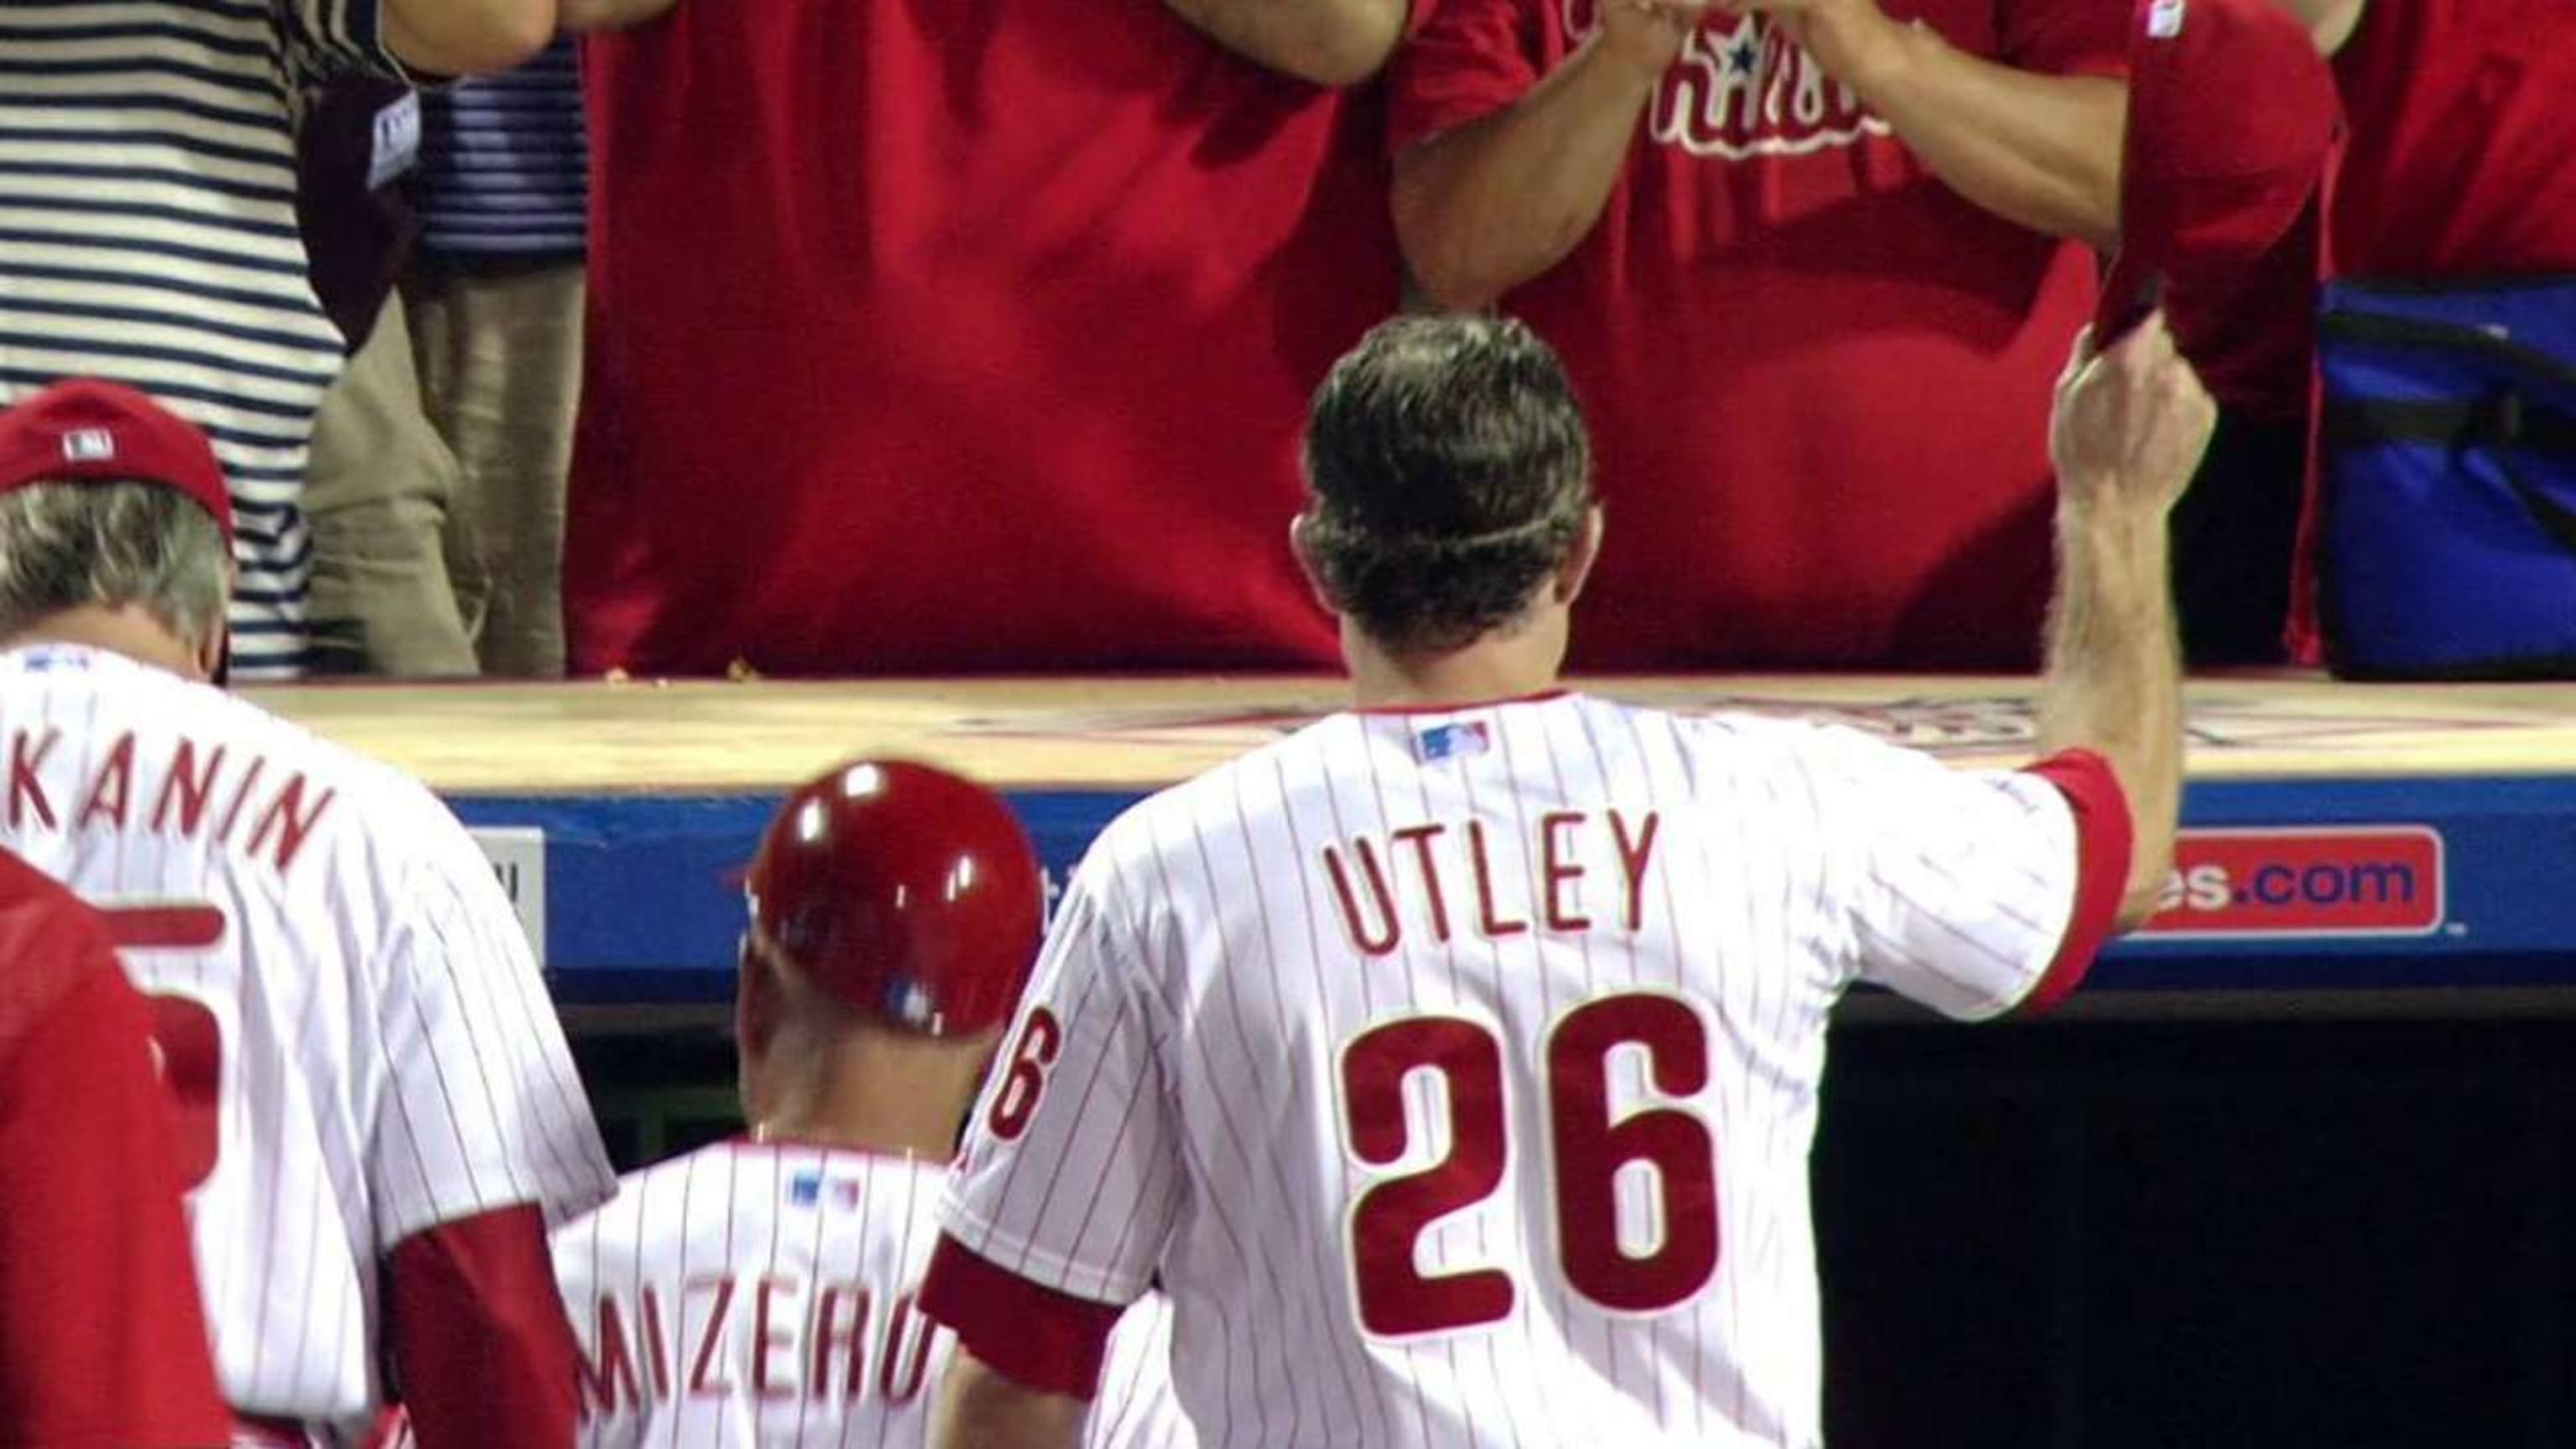 REPORTS: Phillies trade SB Chase Utley to the Dodgers